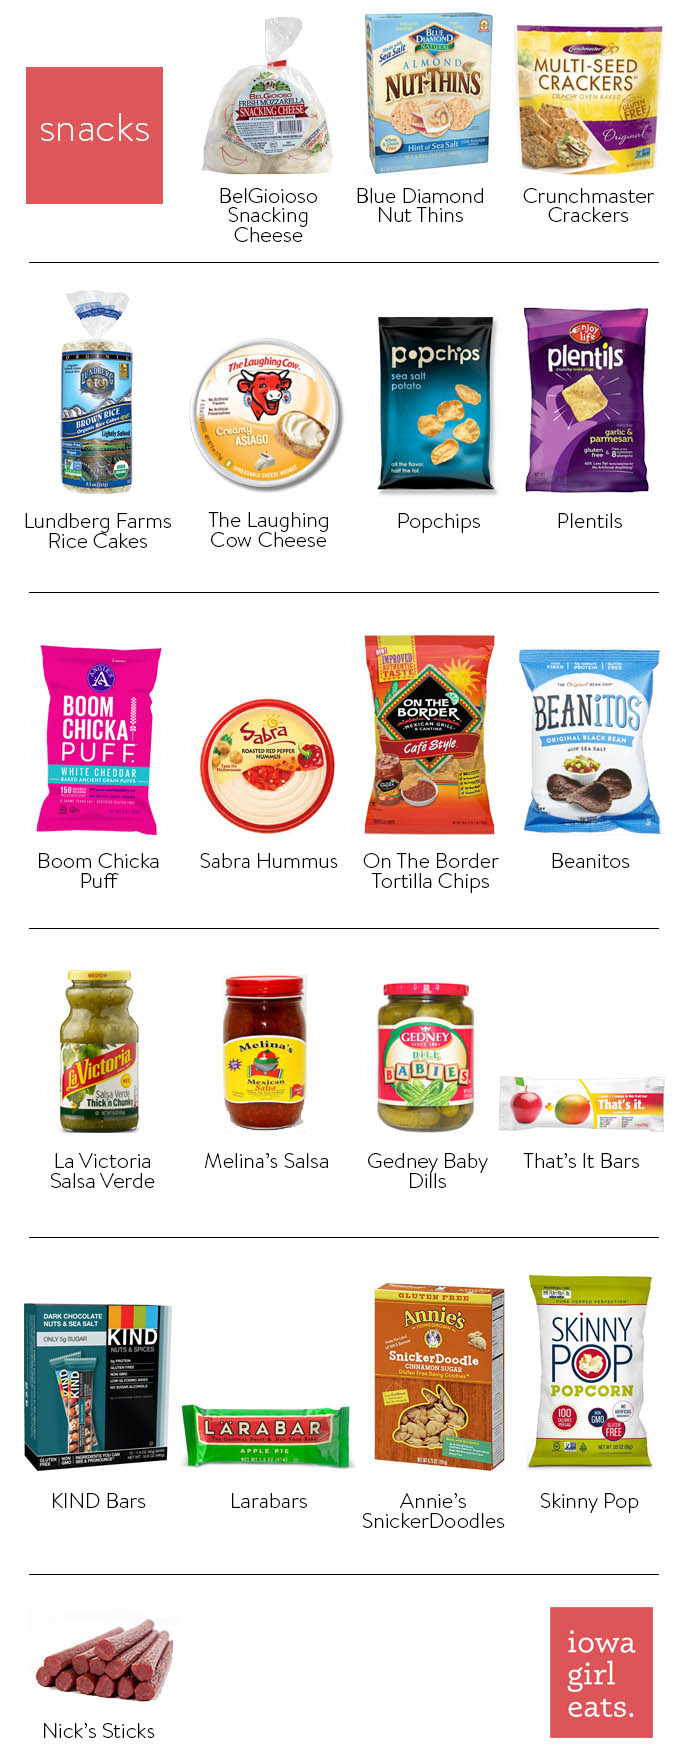 What We Really Eat - Virtual Grocery Shopping with Iowa Girl Eats! | iowagirleats.com